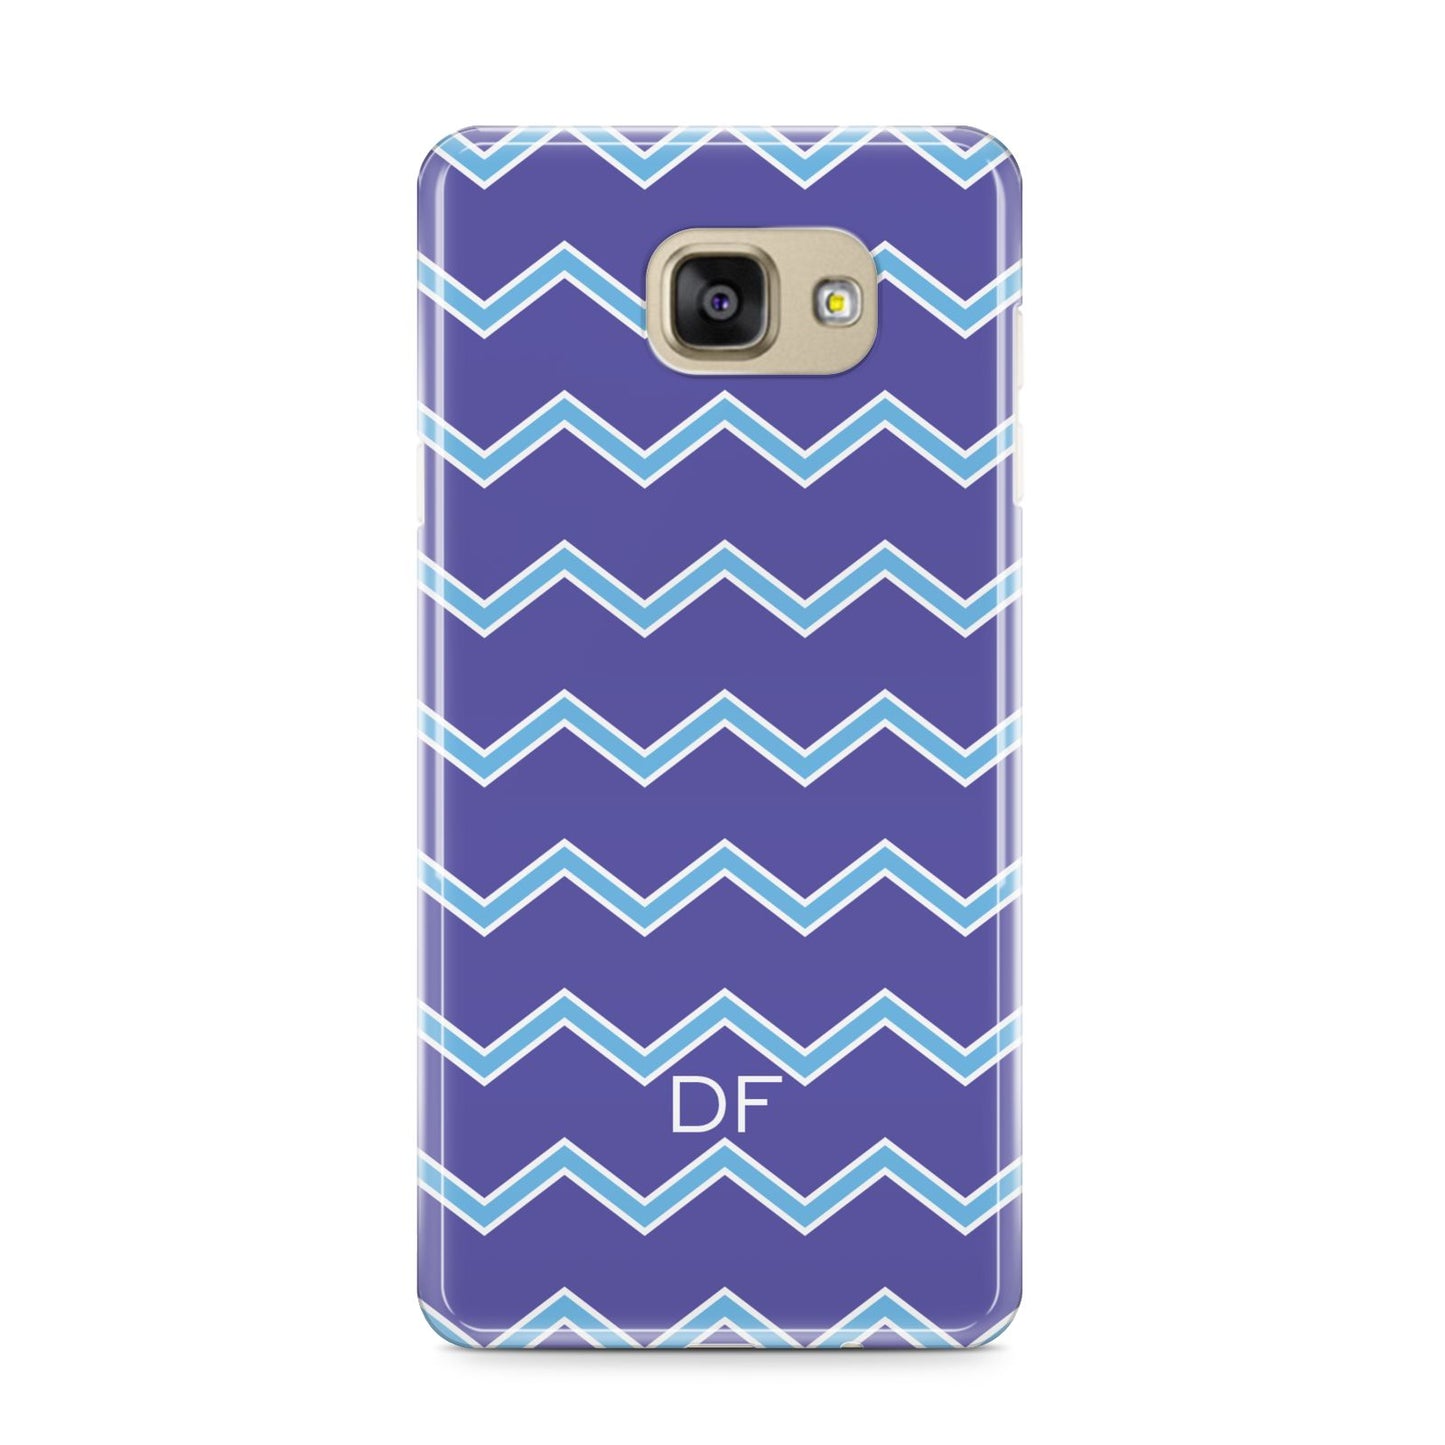 Personalised Chevron 2 Tone Samsung Galaxy A9 2016 Case on gold phone